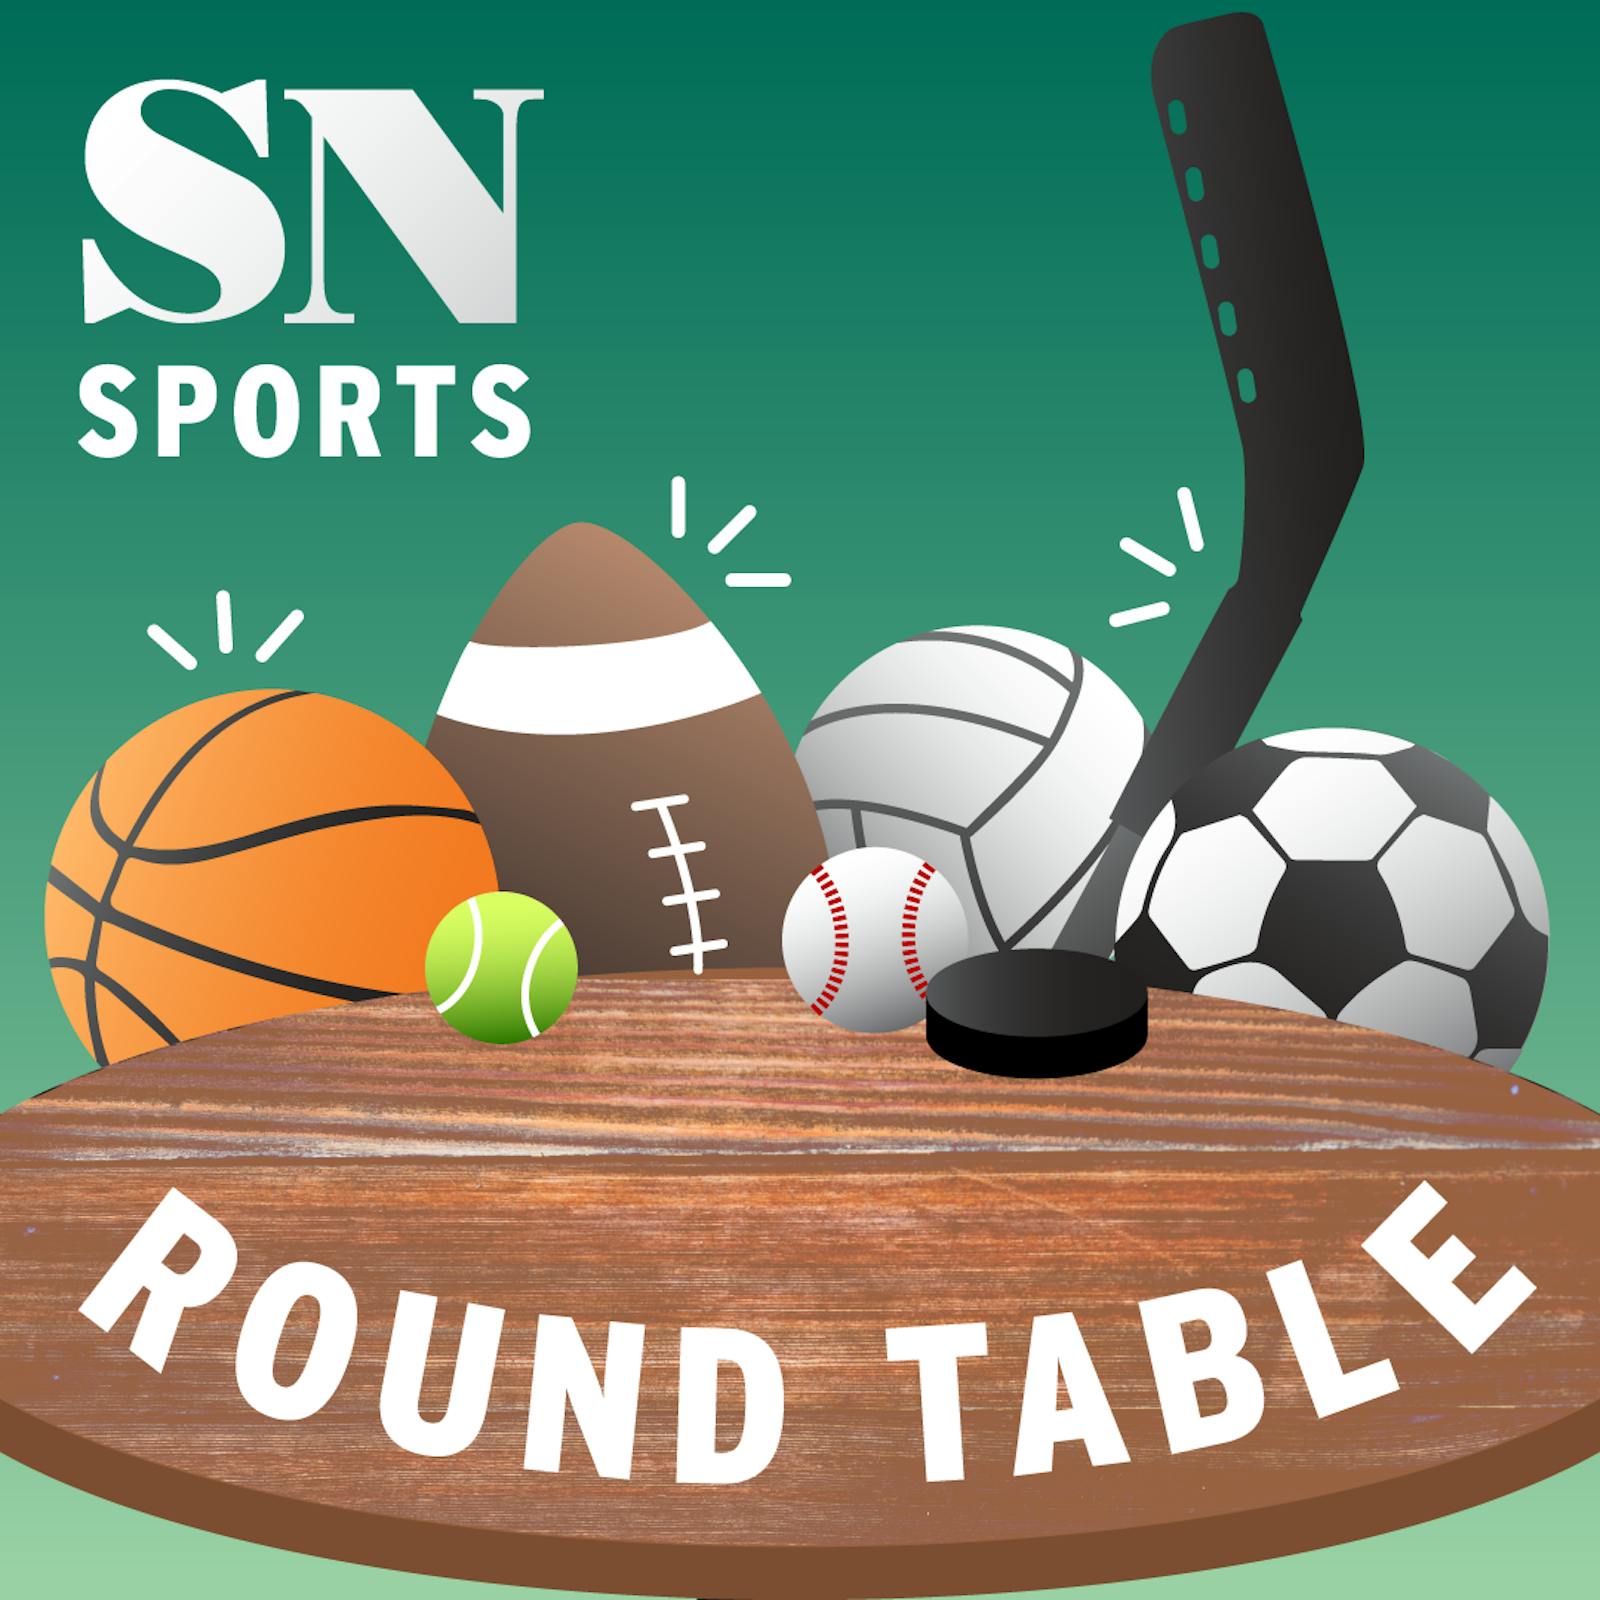 Trivia Championship at the Sports Roundtable